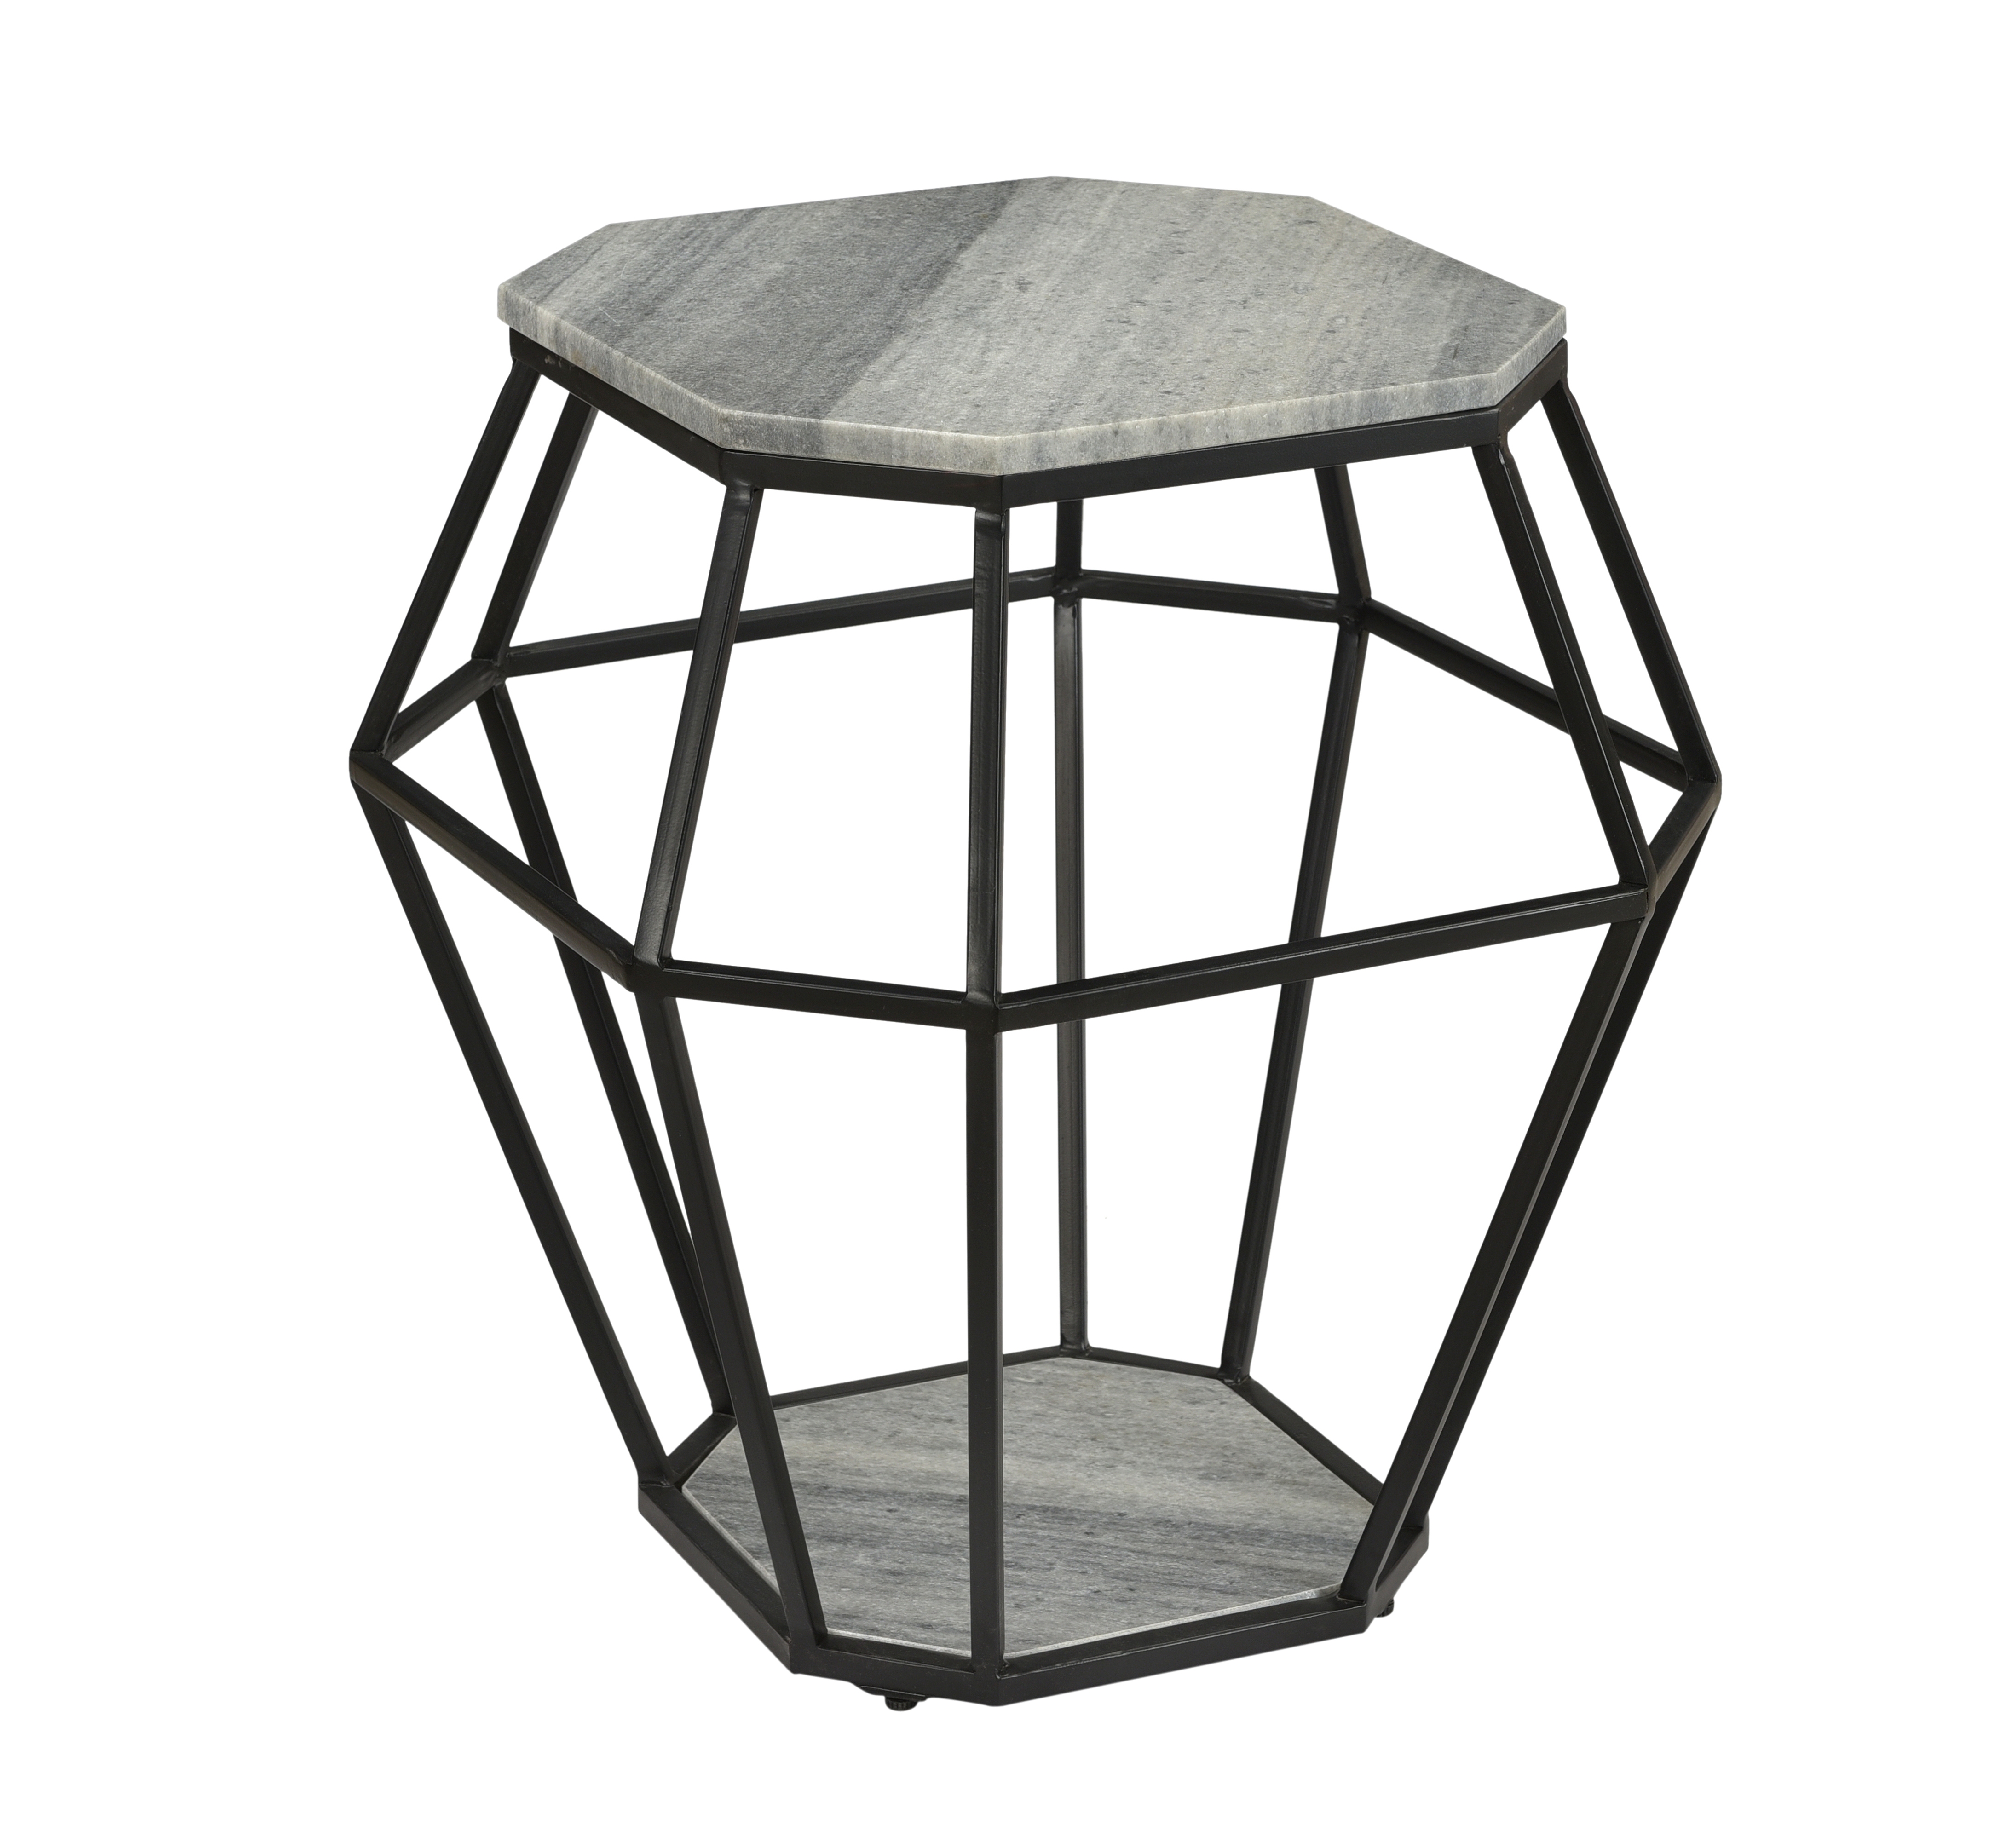 Octagonal Accent Table - Whispy Grey Marble & Black Powder Coat - Image 0